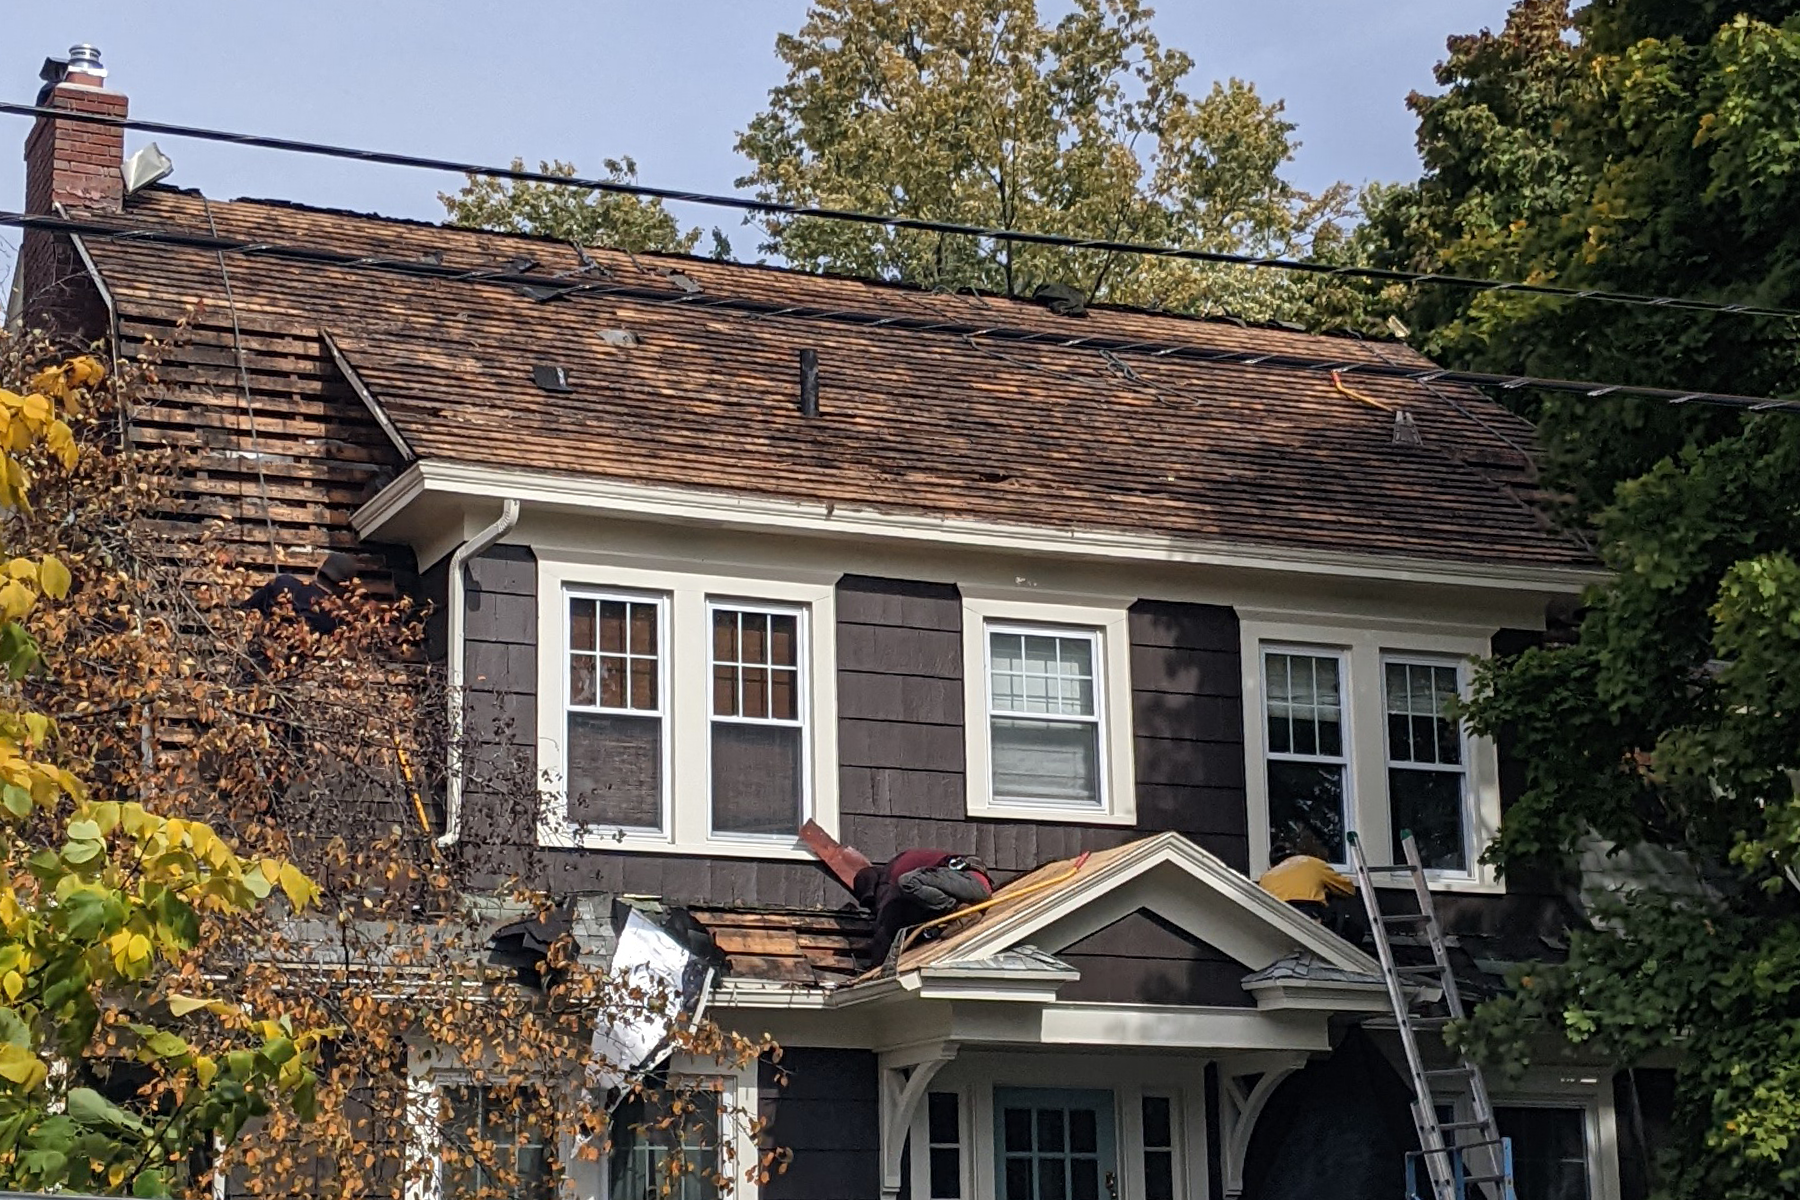 Roof Replacement for Our Century Old Dutch Colonial